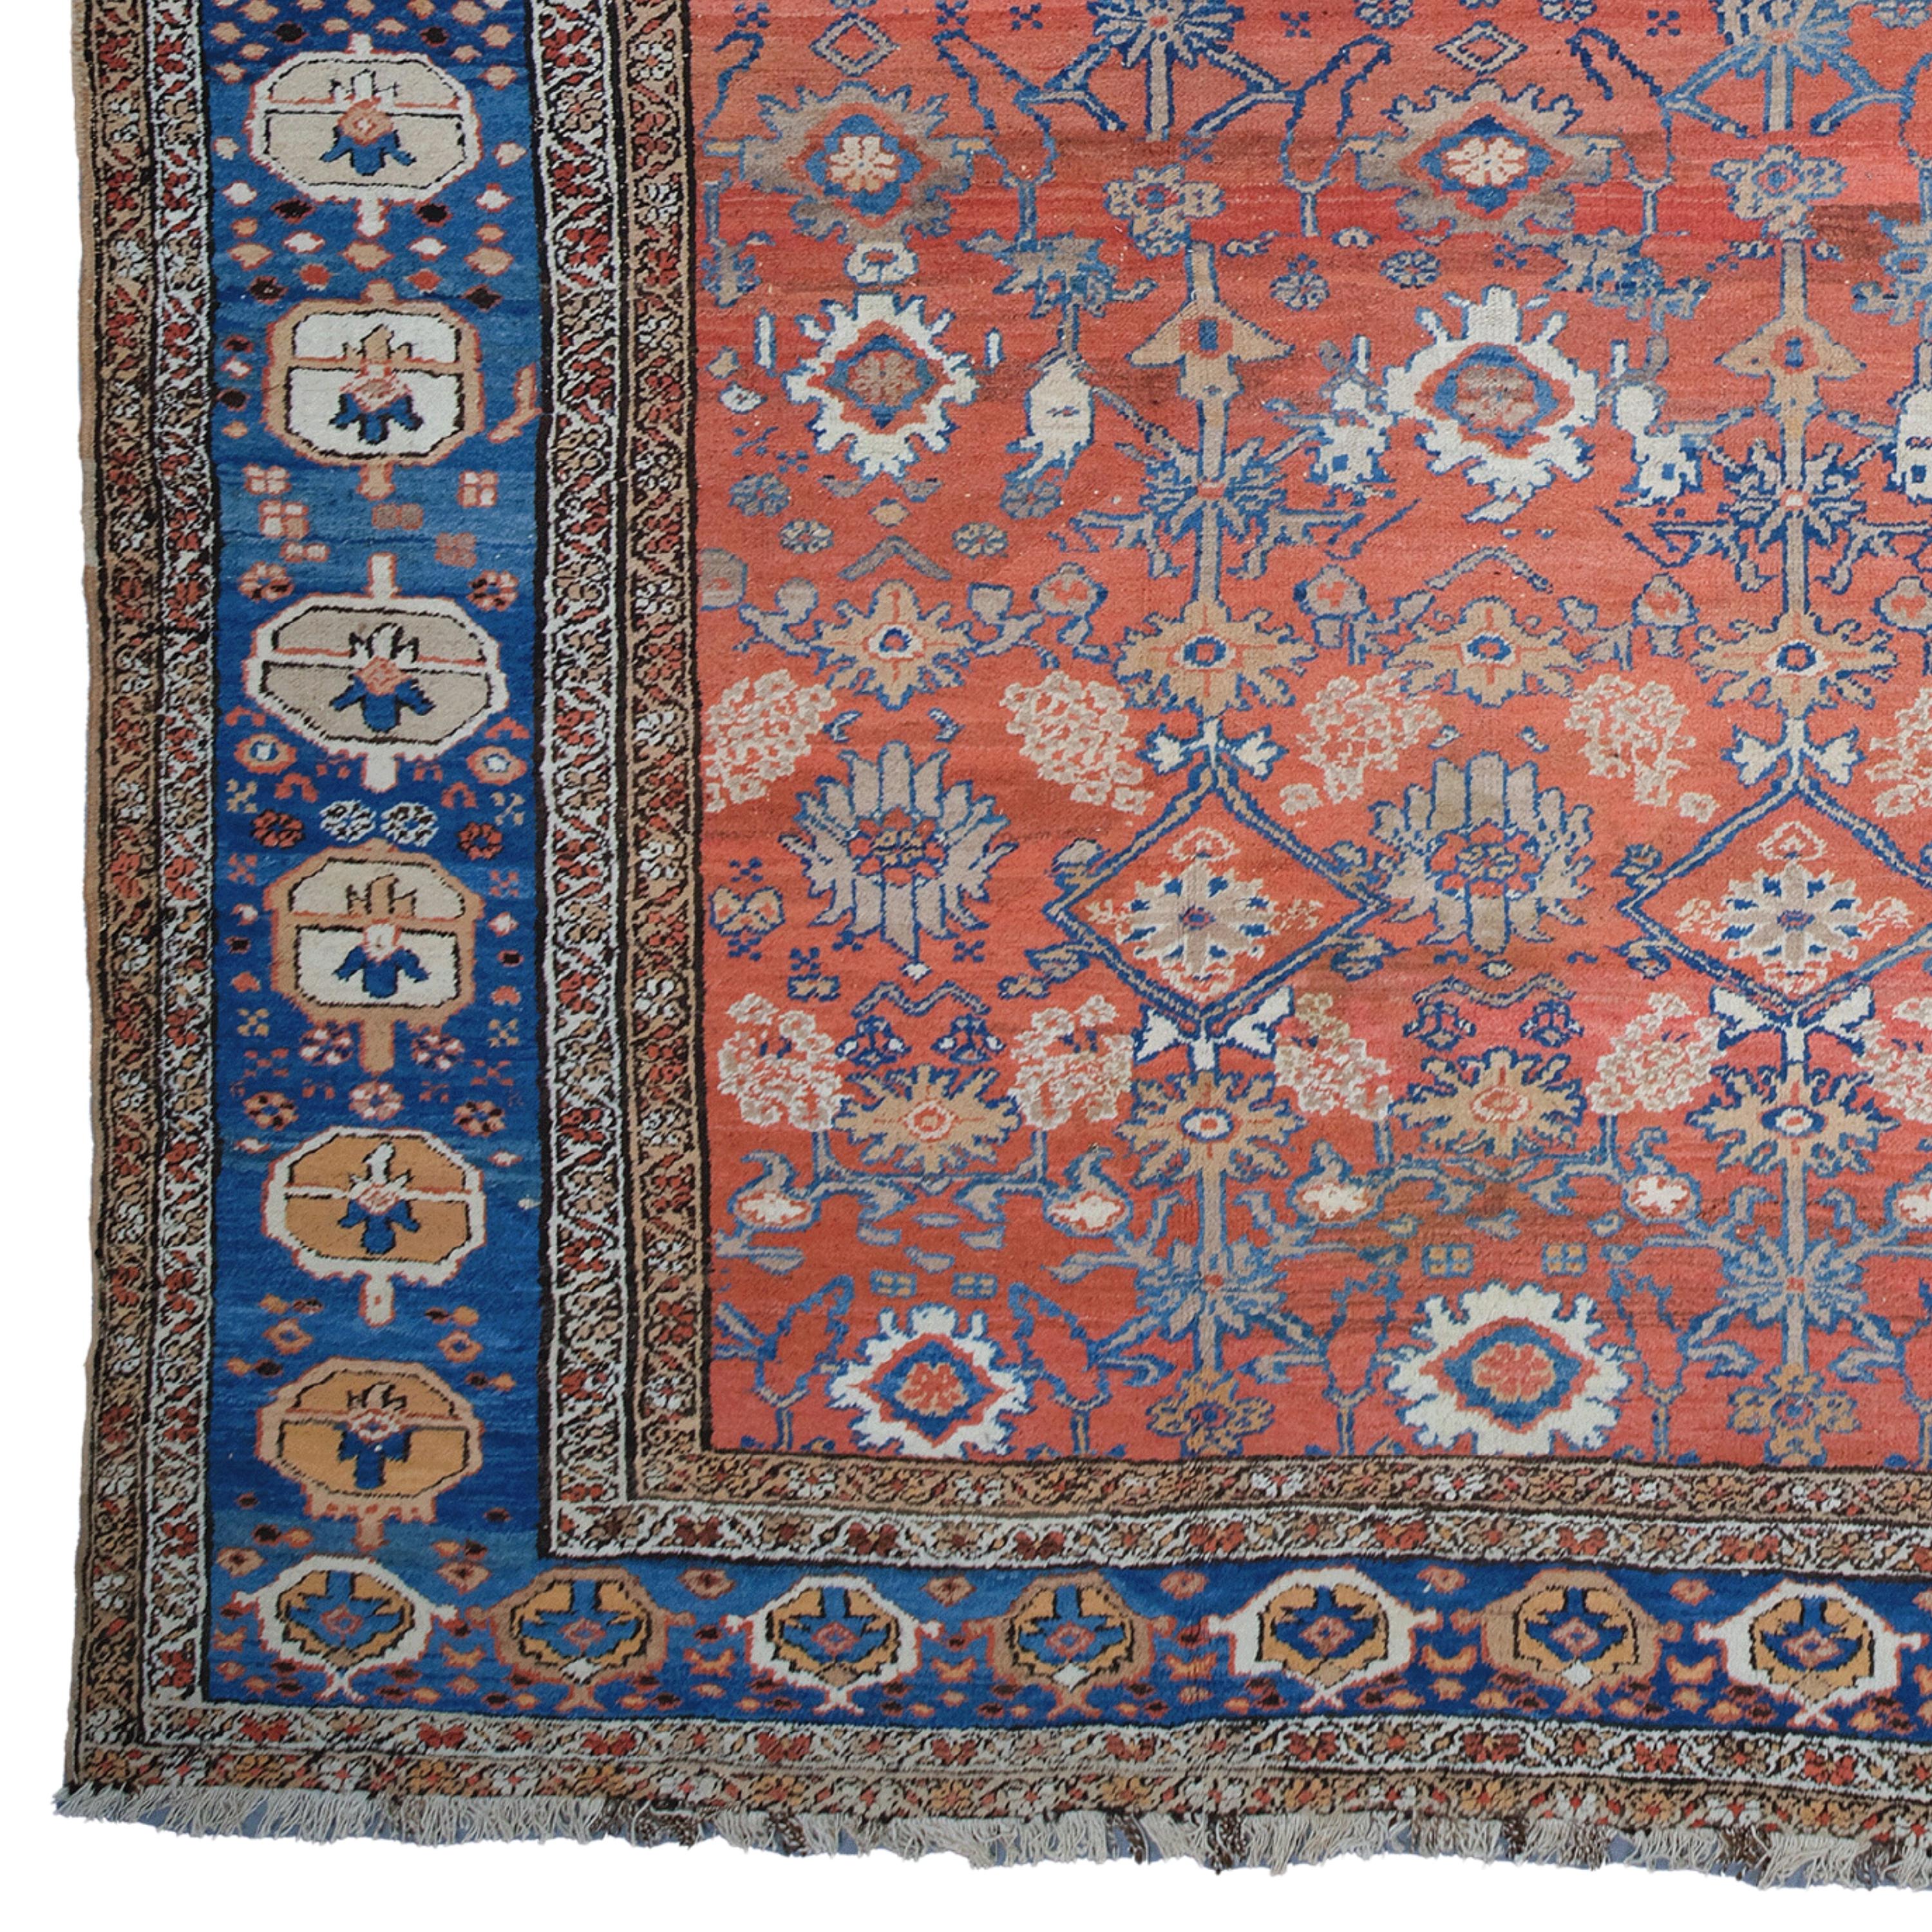 A Timeless Masterpiece: Antique Bakshaish Carpet from the Late 19th Century

If you want to add historical and artistic value to your home, this antique carpet is for you. This carpet is a Bakshaish carpet woven in the Bakshaish region at the end of